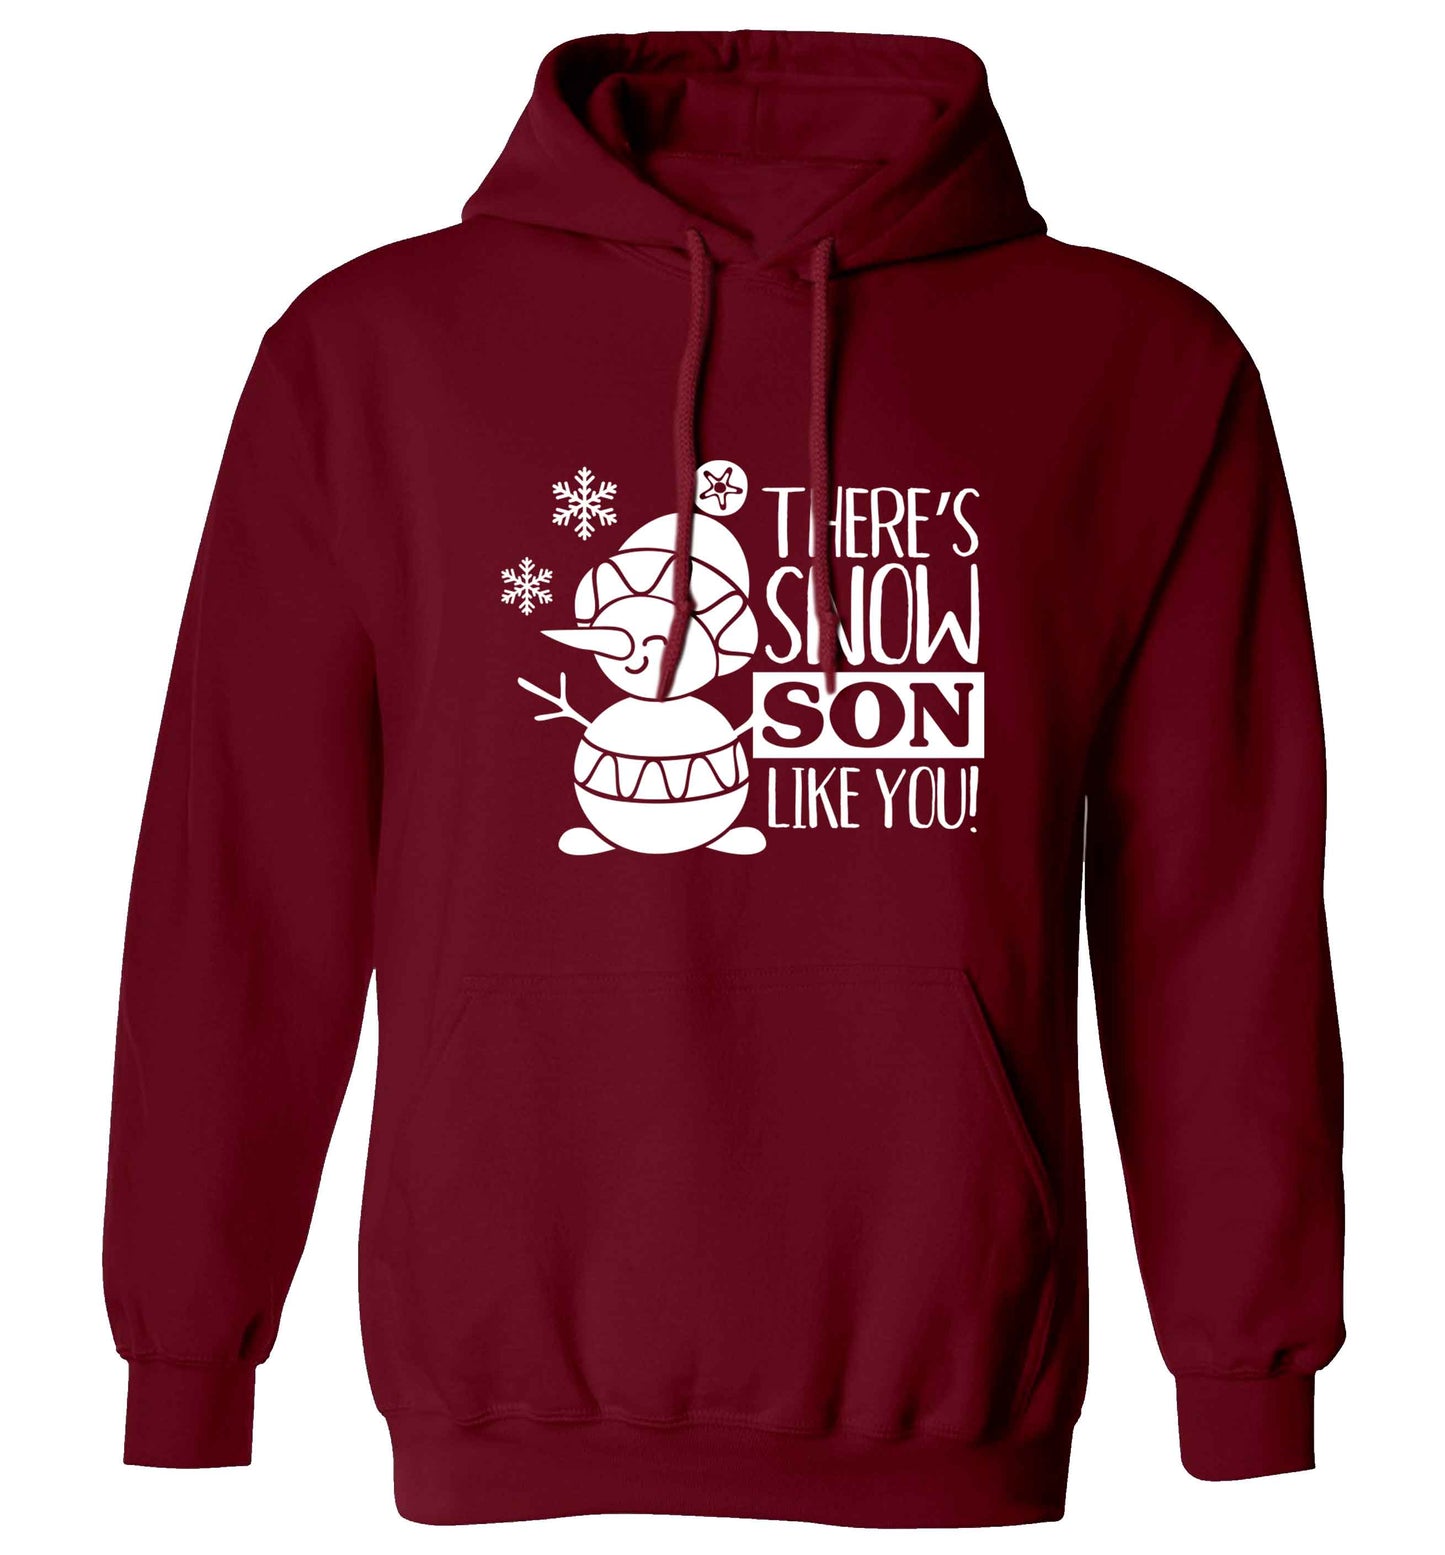 There's snow son like you adults unisex maroon hoodie 2XL